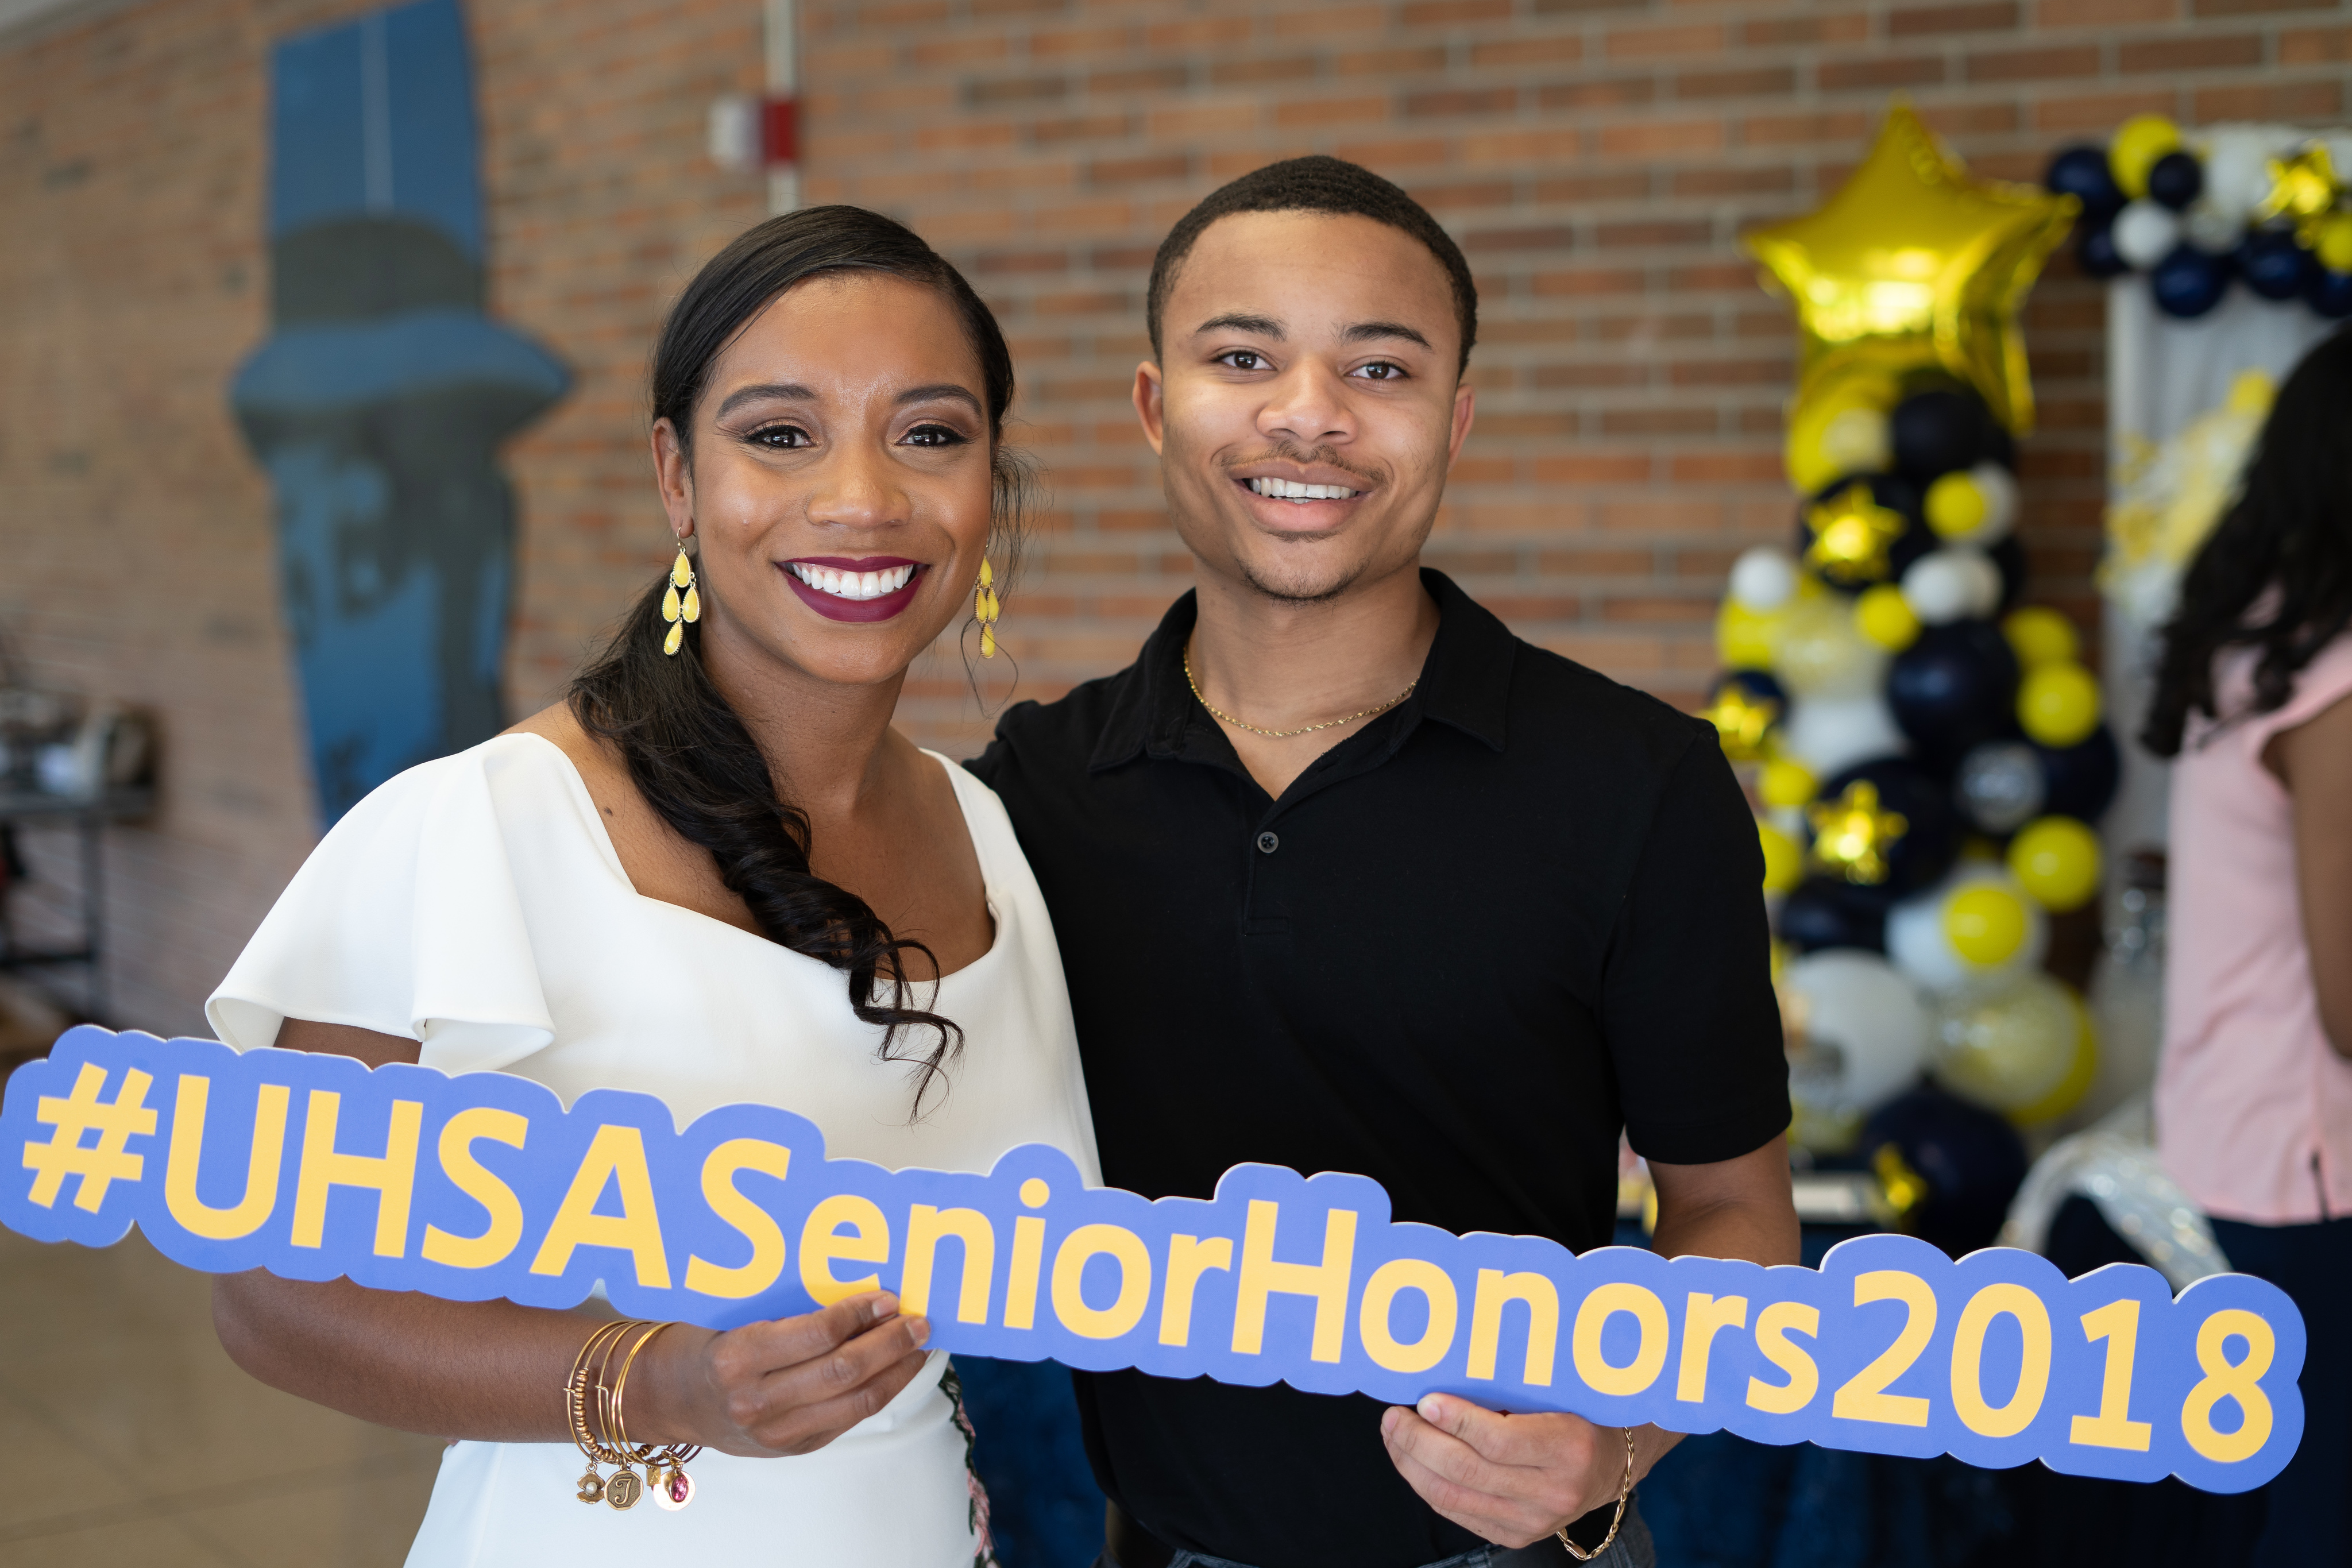 UHSA Senior Honors Student and Staff